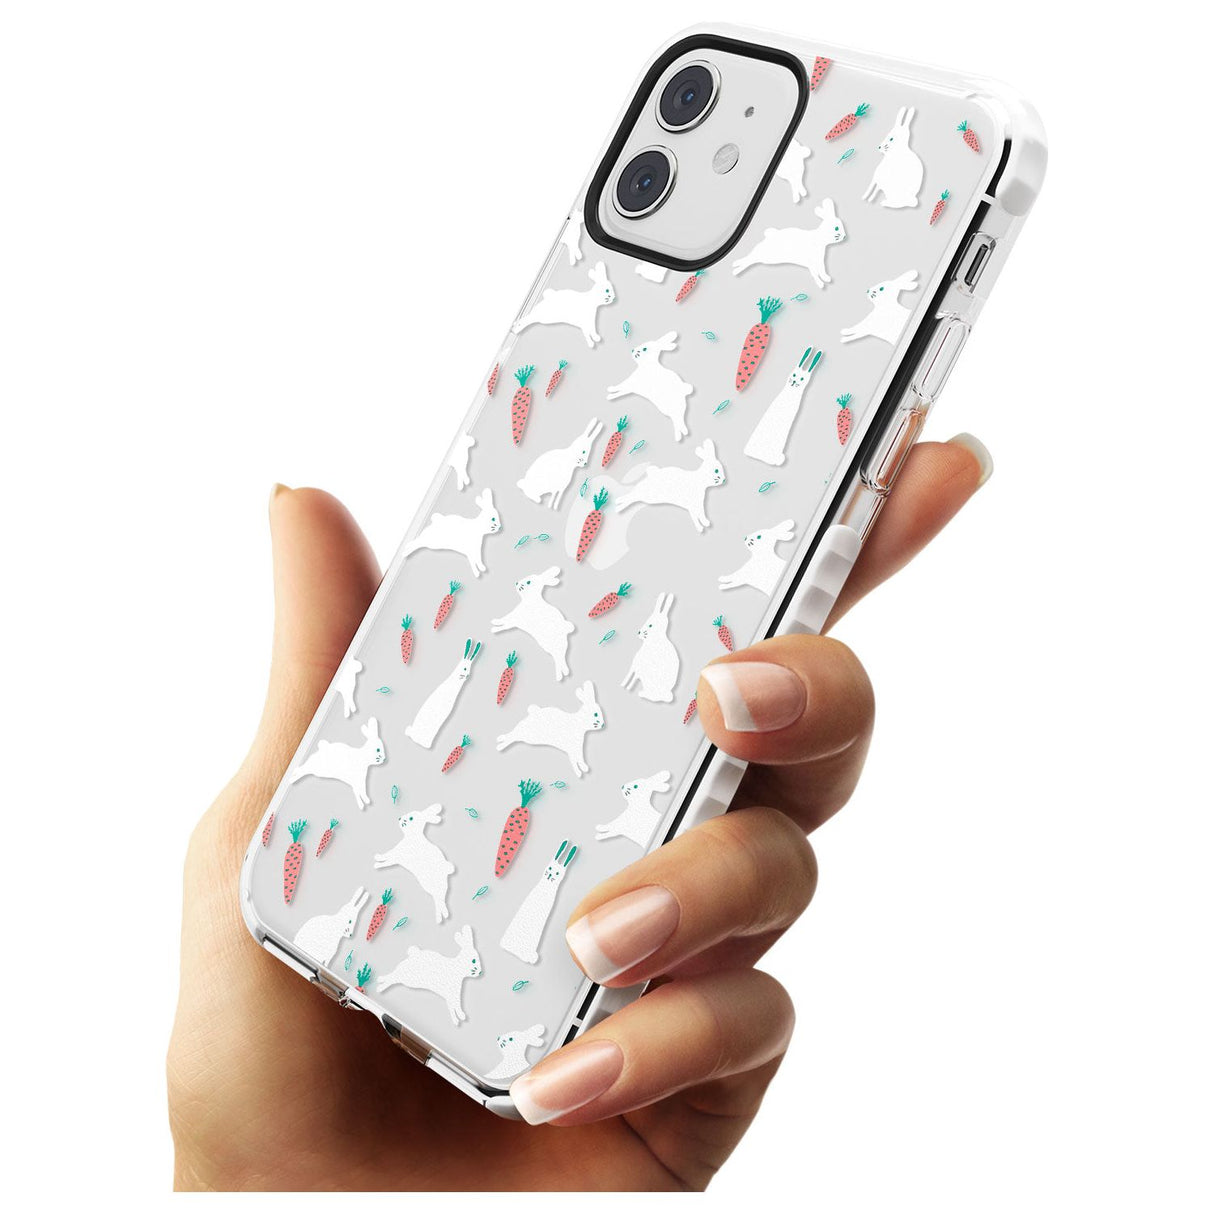 White Bunnies and Carrots Impact Phone Case for iPhone 11